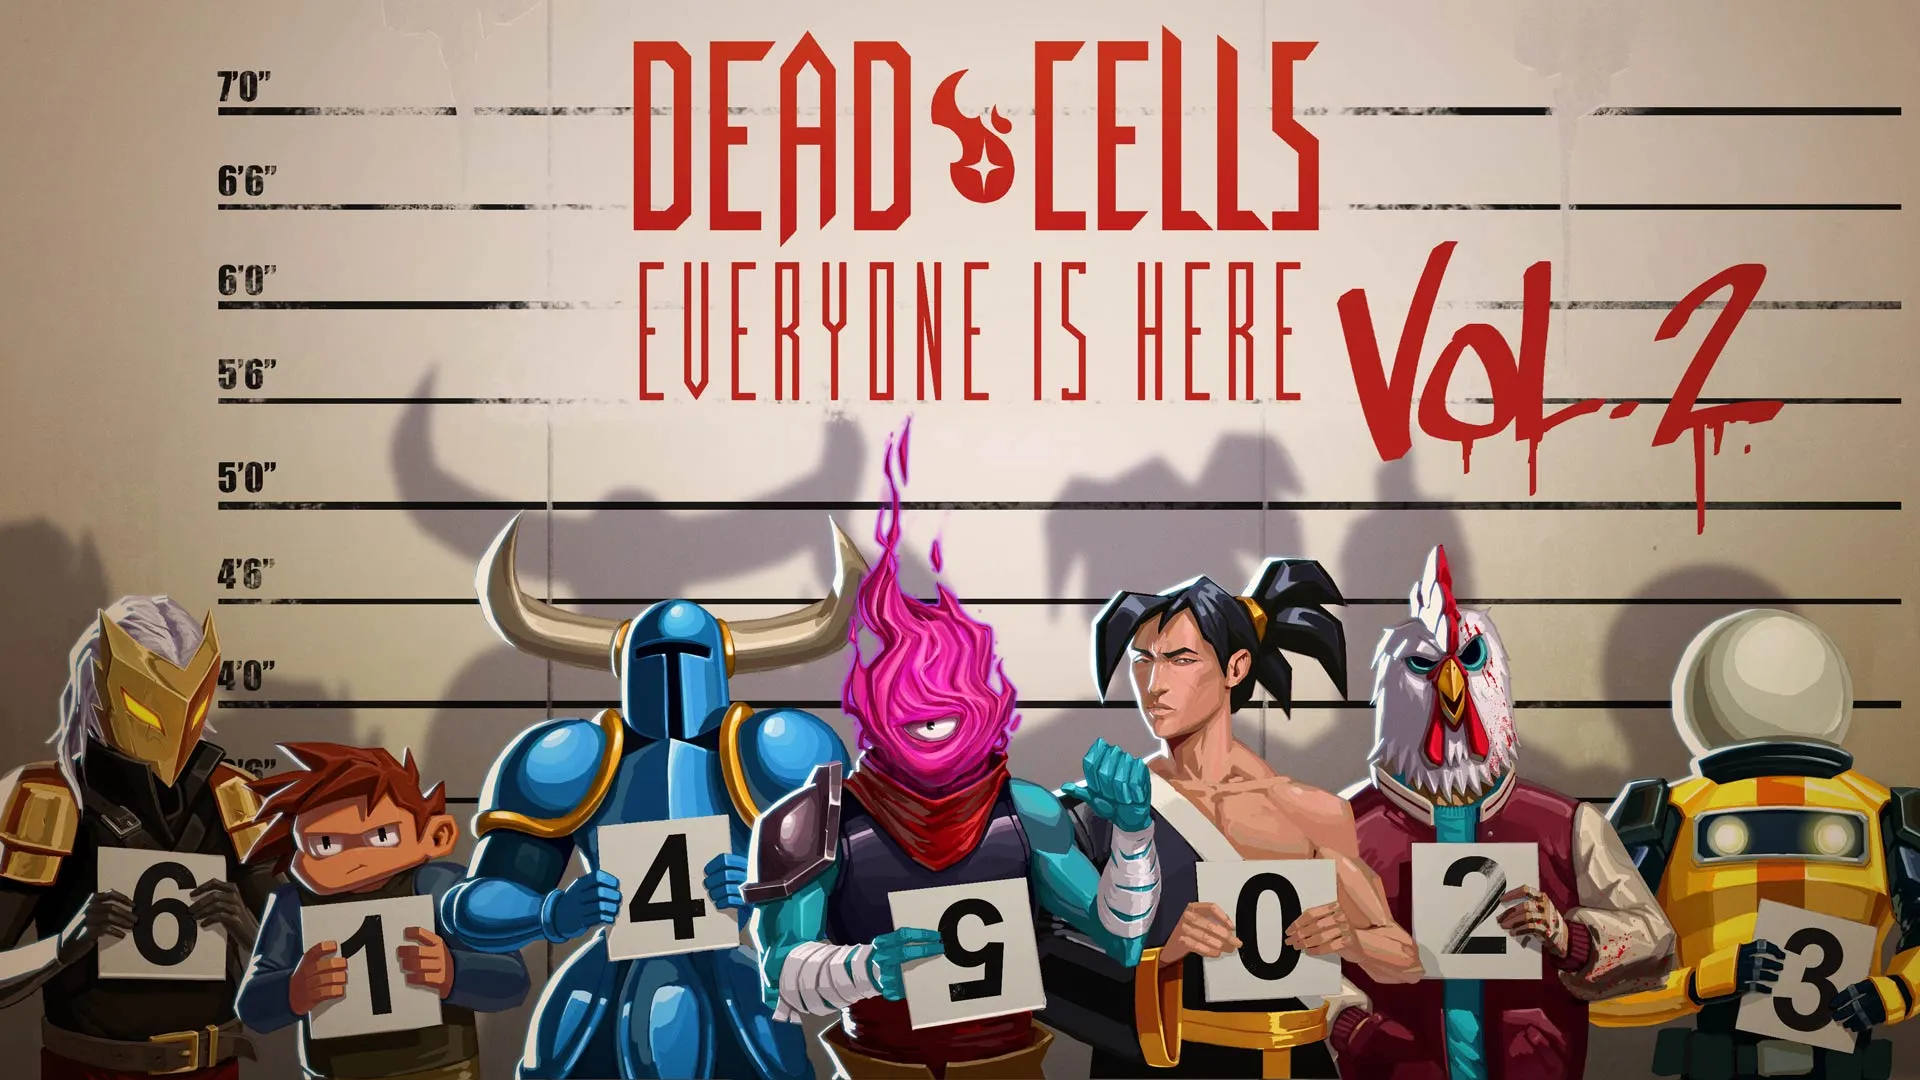 Everyone is Here Again Bundle packs Risk of Rain 2, Dead Cells, Shovel Knight, and more